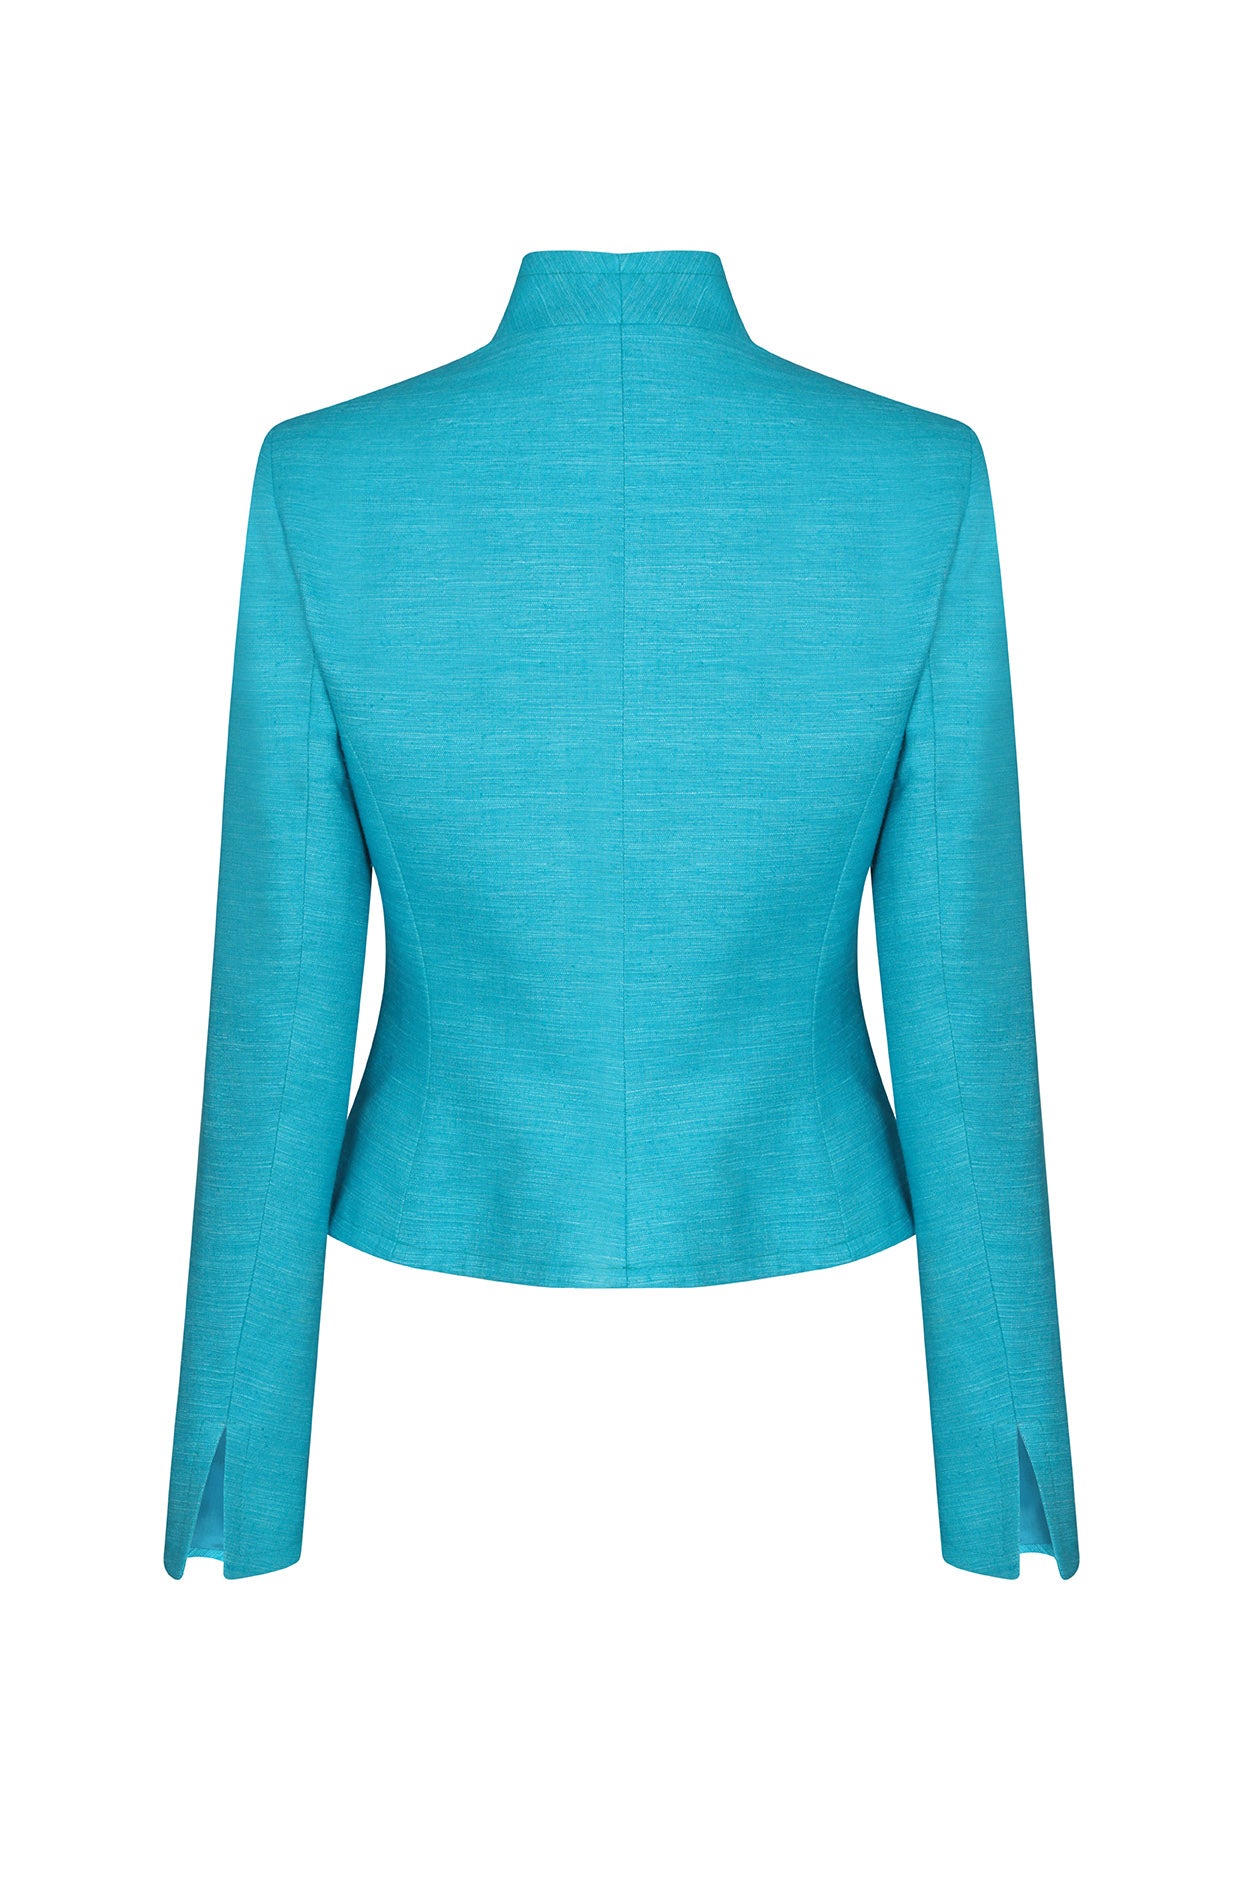 Short Fitted Jacket in Turquoise Plain Raw Silk Tussar - Margo